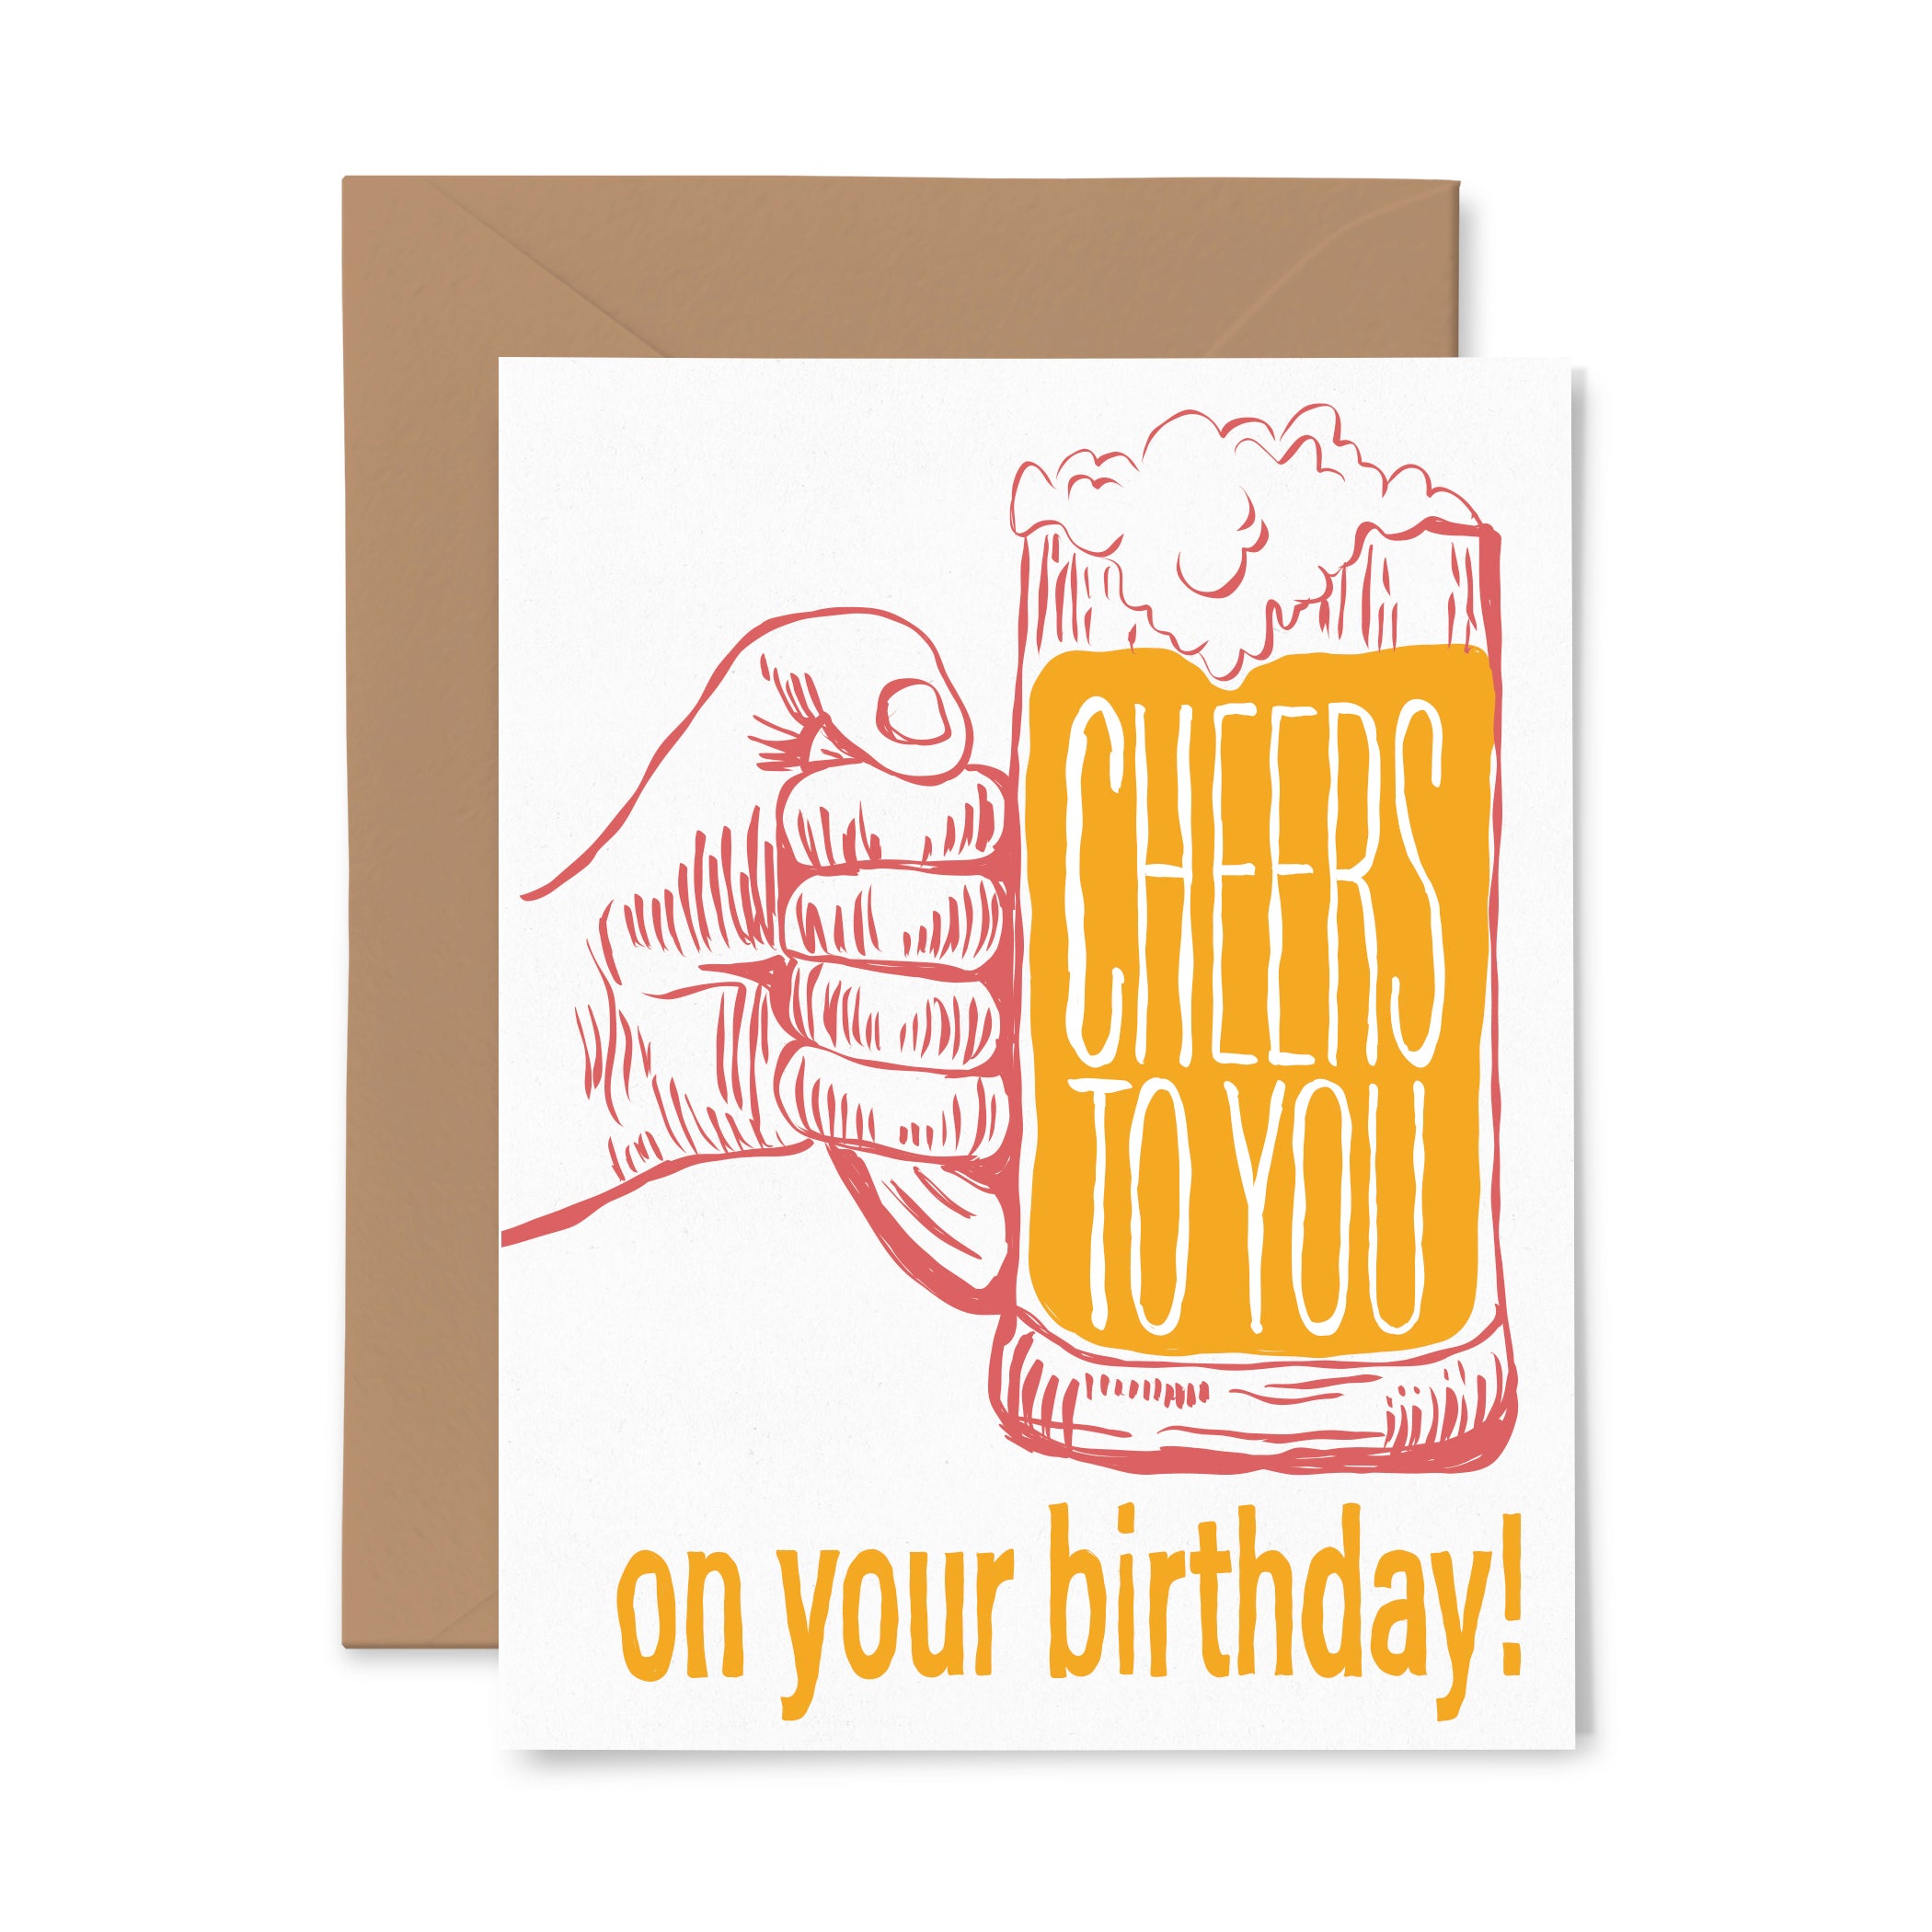 Cheers to you | Birthday | Letterpress Greeting Card